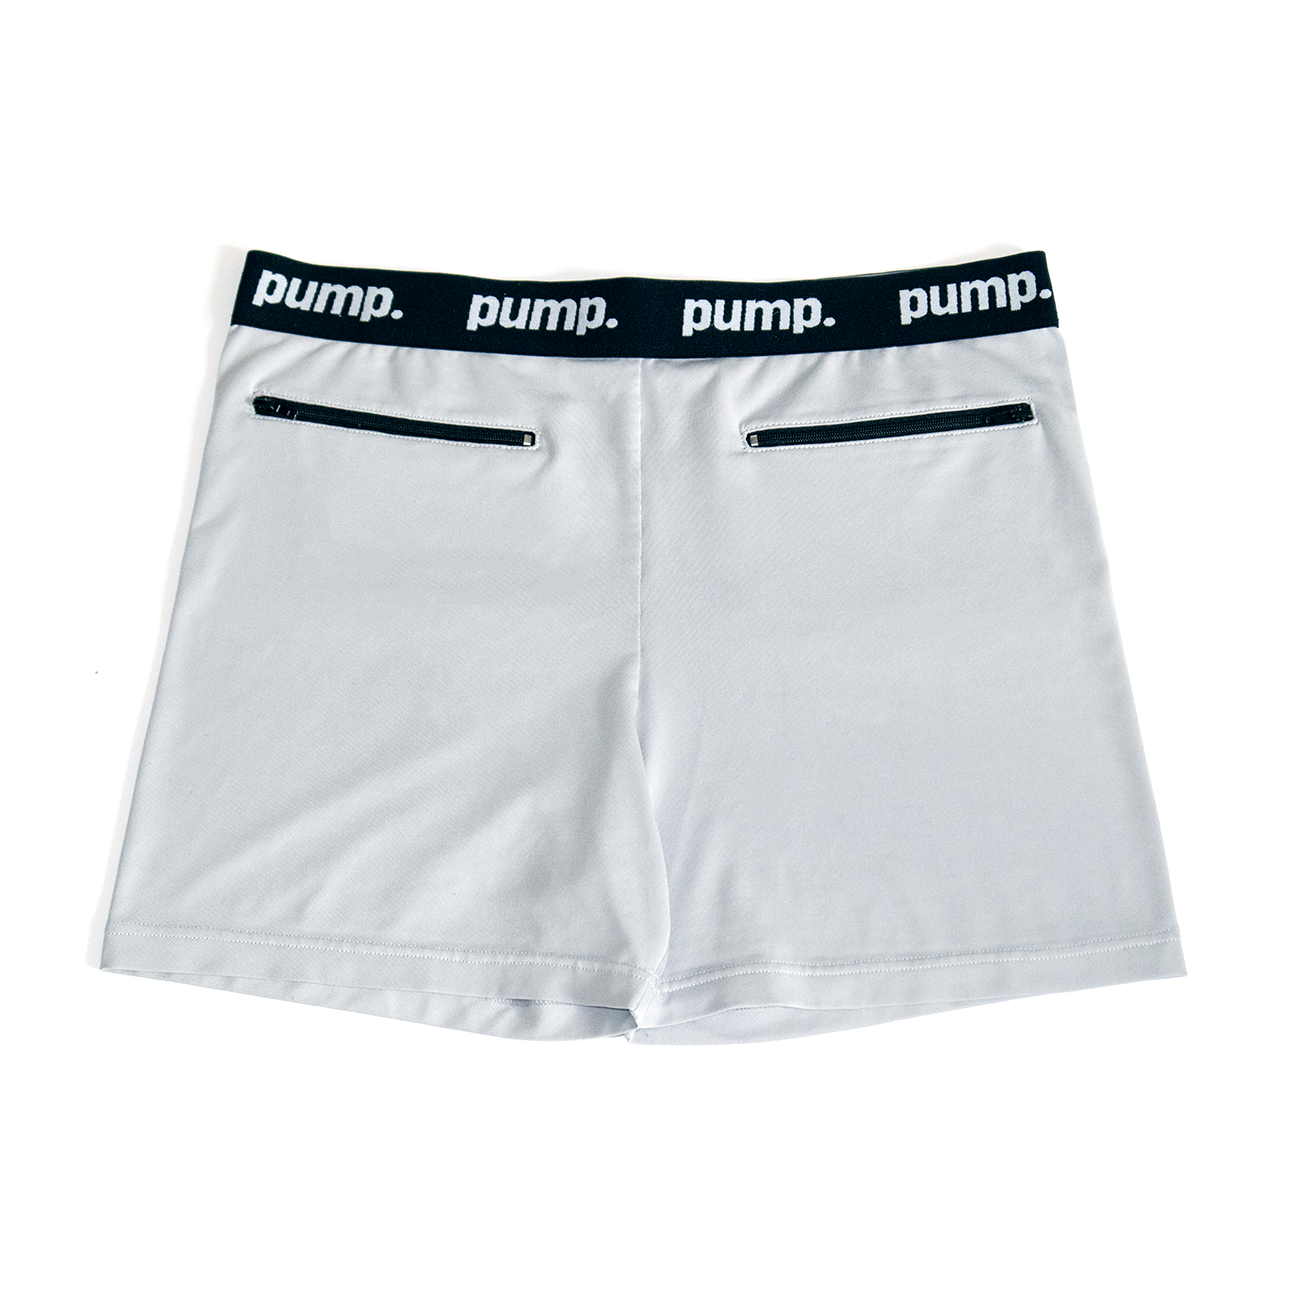 Large Pump! Jogger/trunk/boxer/underwear. Gym Shorts. With side Pockets